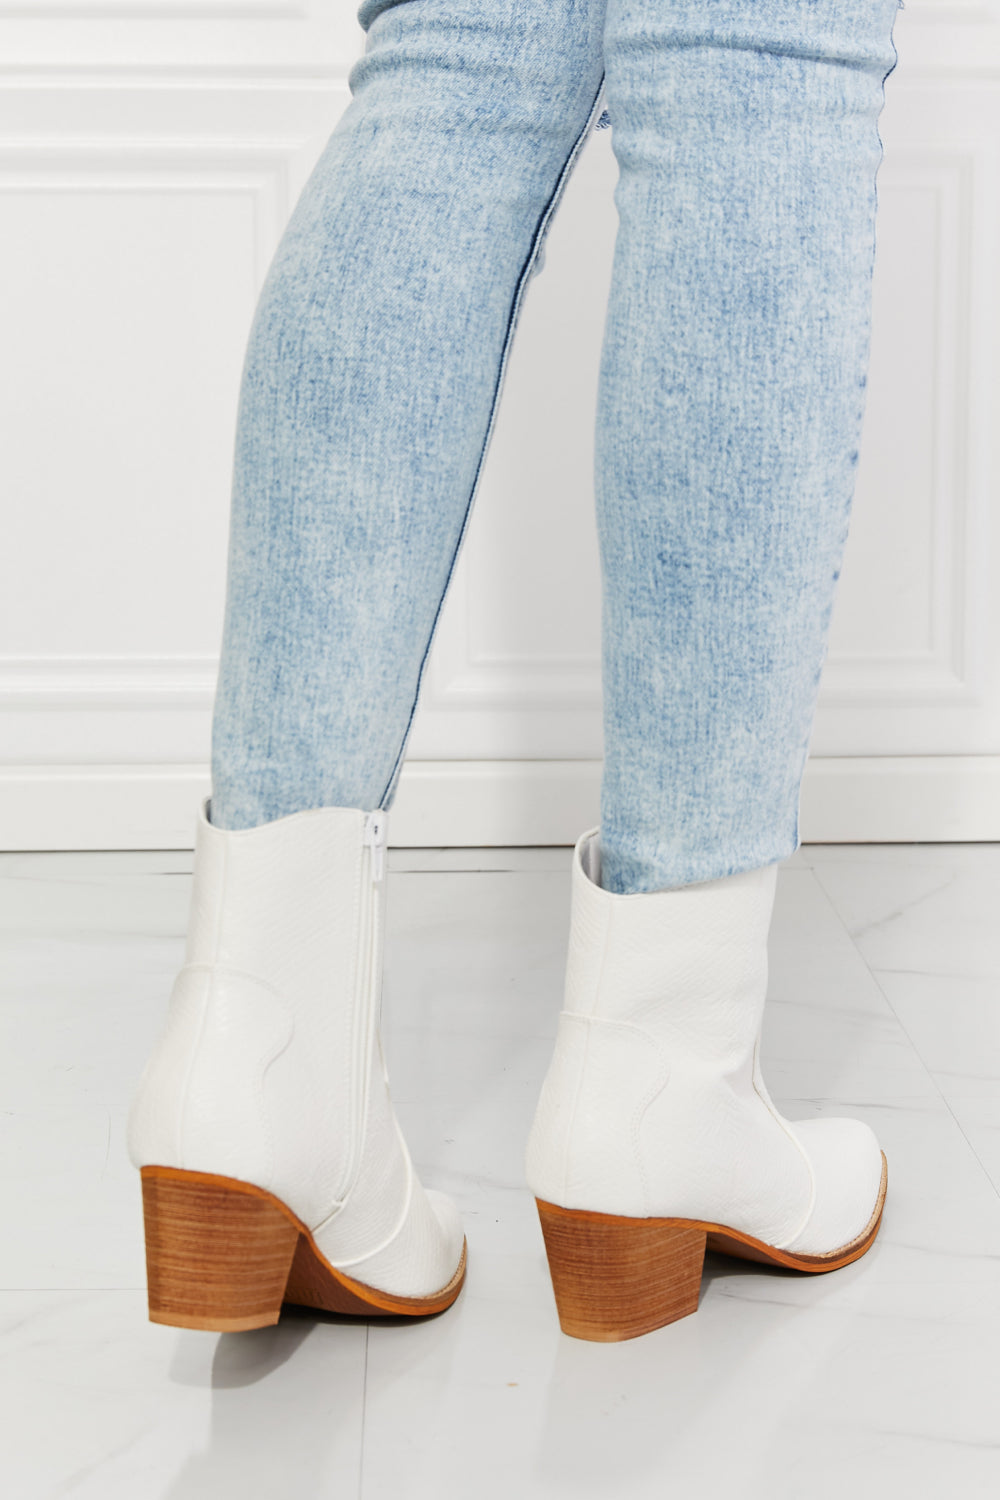 Western Ankle Boots in White